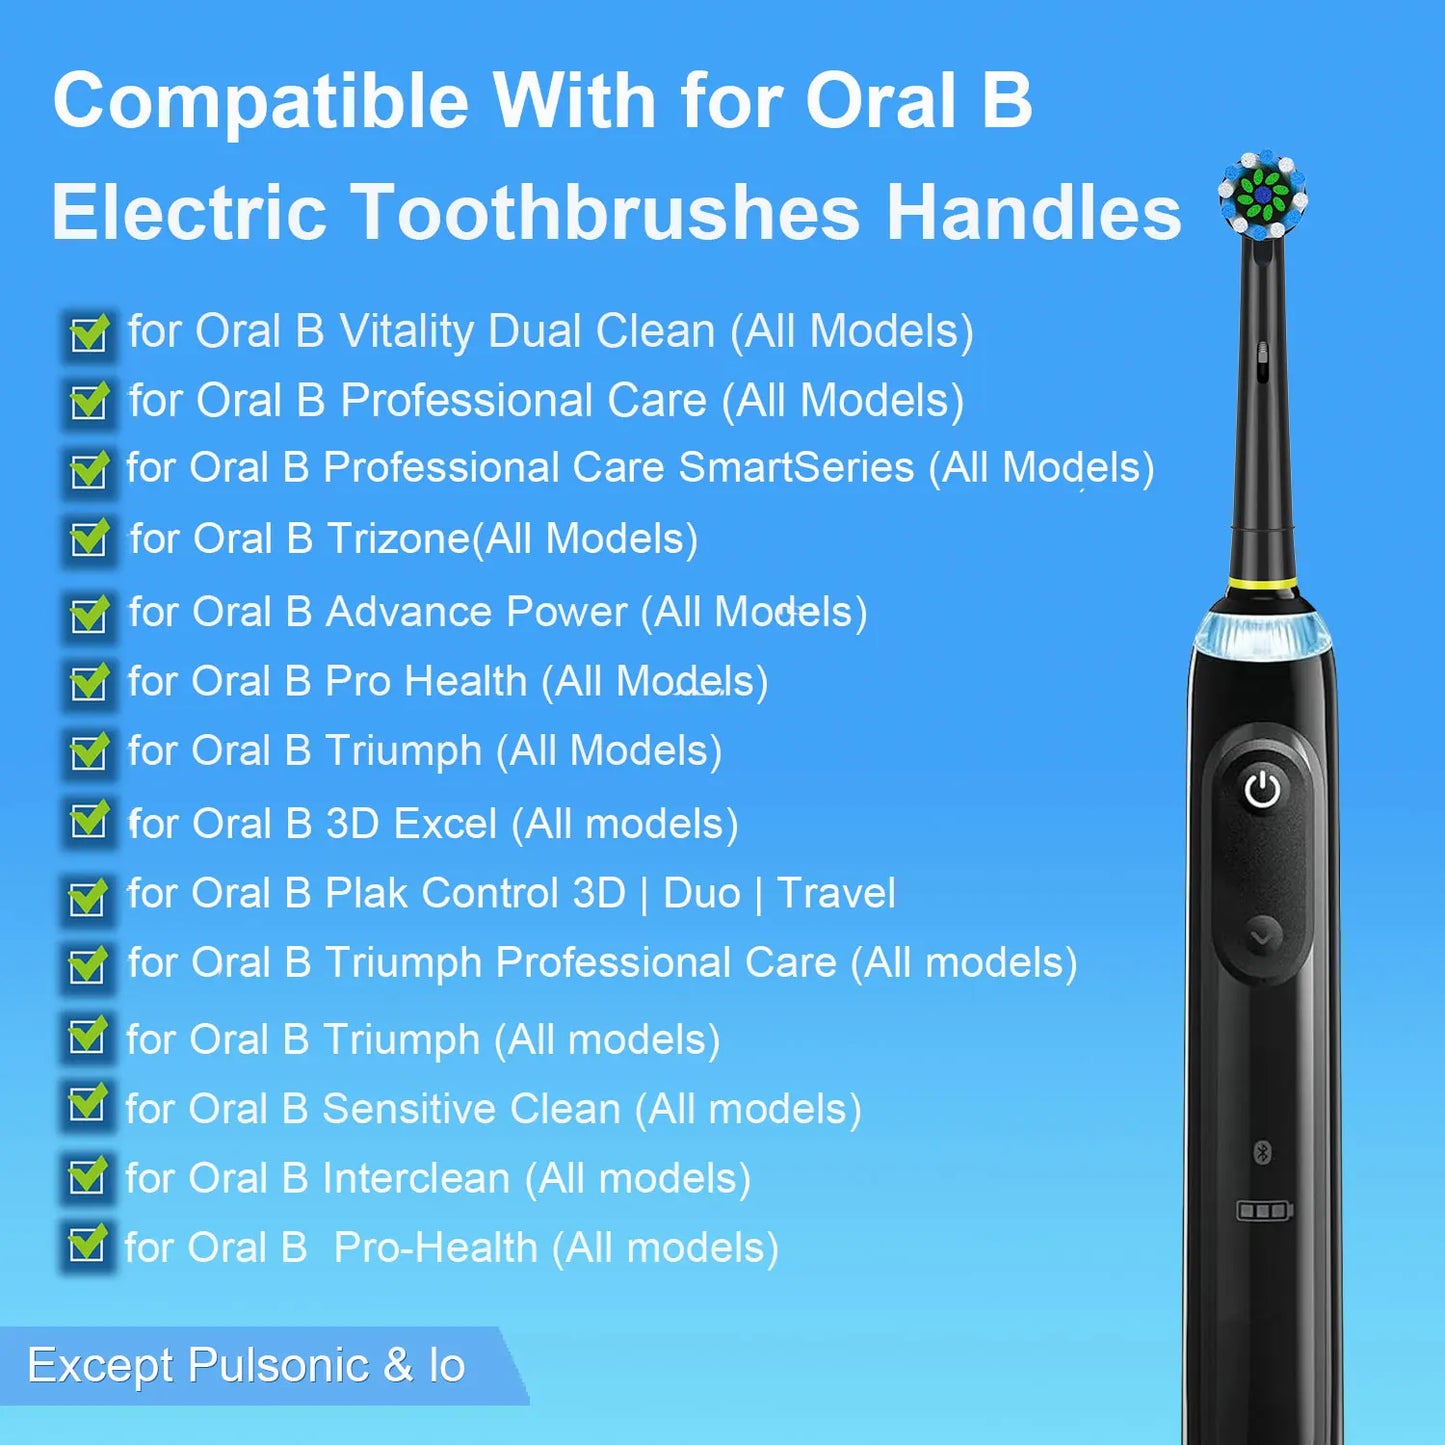 Toothbrush Heads Compatible with Braun Oral B Electric Toothbrush, Replacement Toothbrush Heads Fit for Oral b, 16Pack.